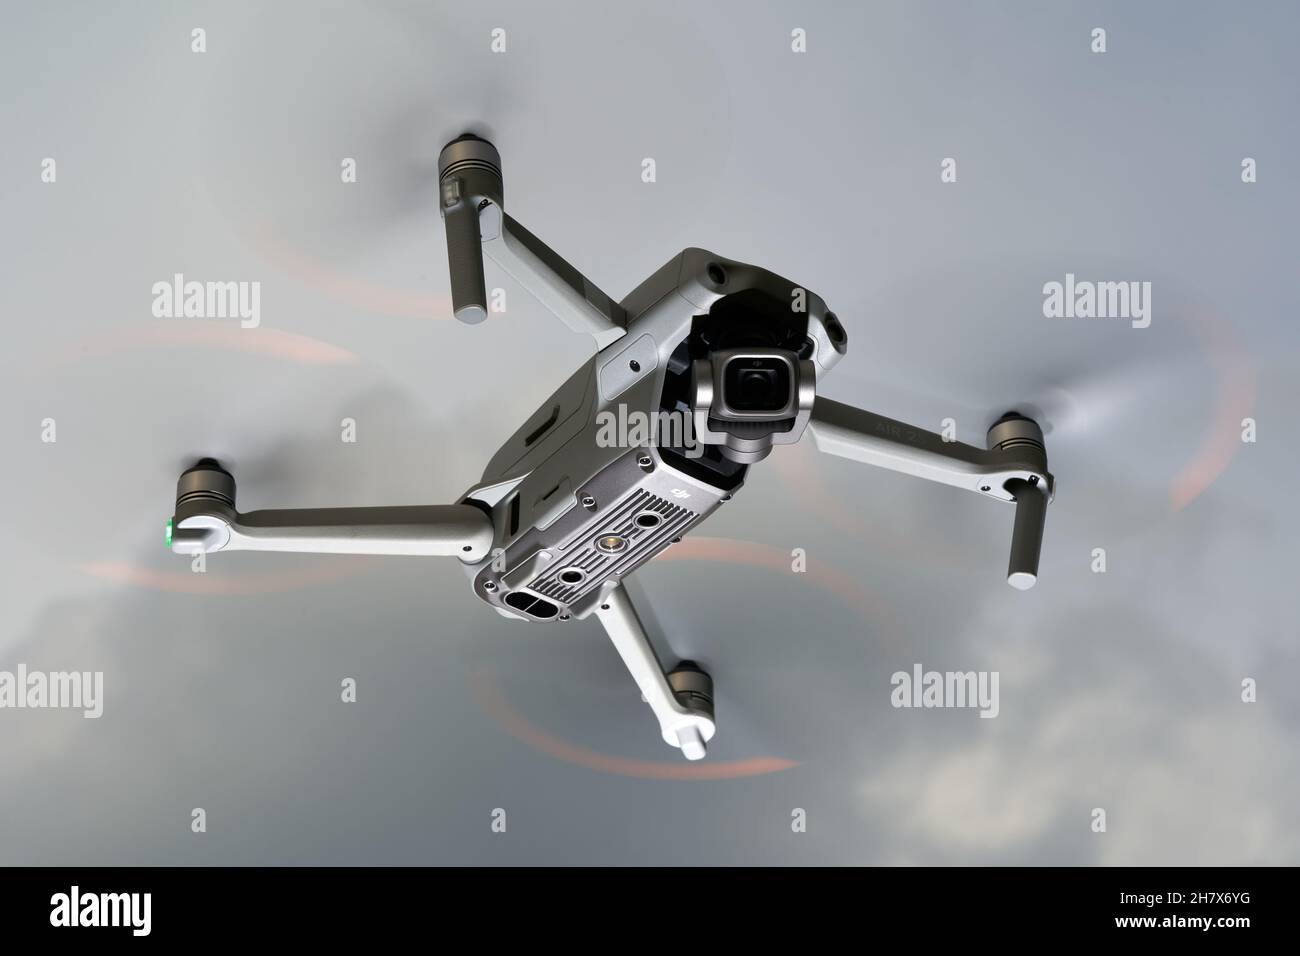 Nürtingen, Germany - June 26, 2021: Drone air 2s from dji hovers in front of gray sky. The flying object is moved in the air by 4 propellers and is eq Stock Photo